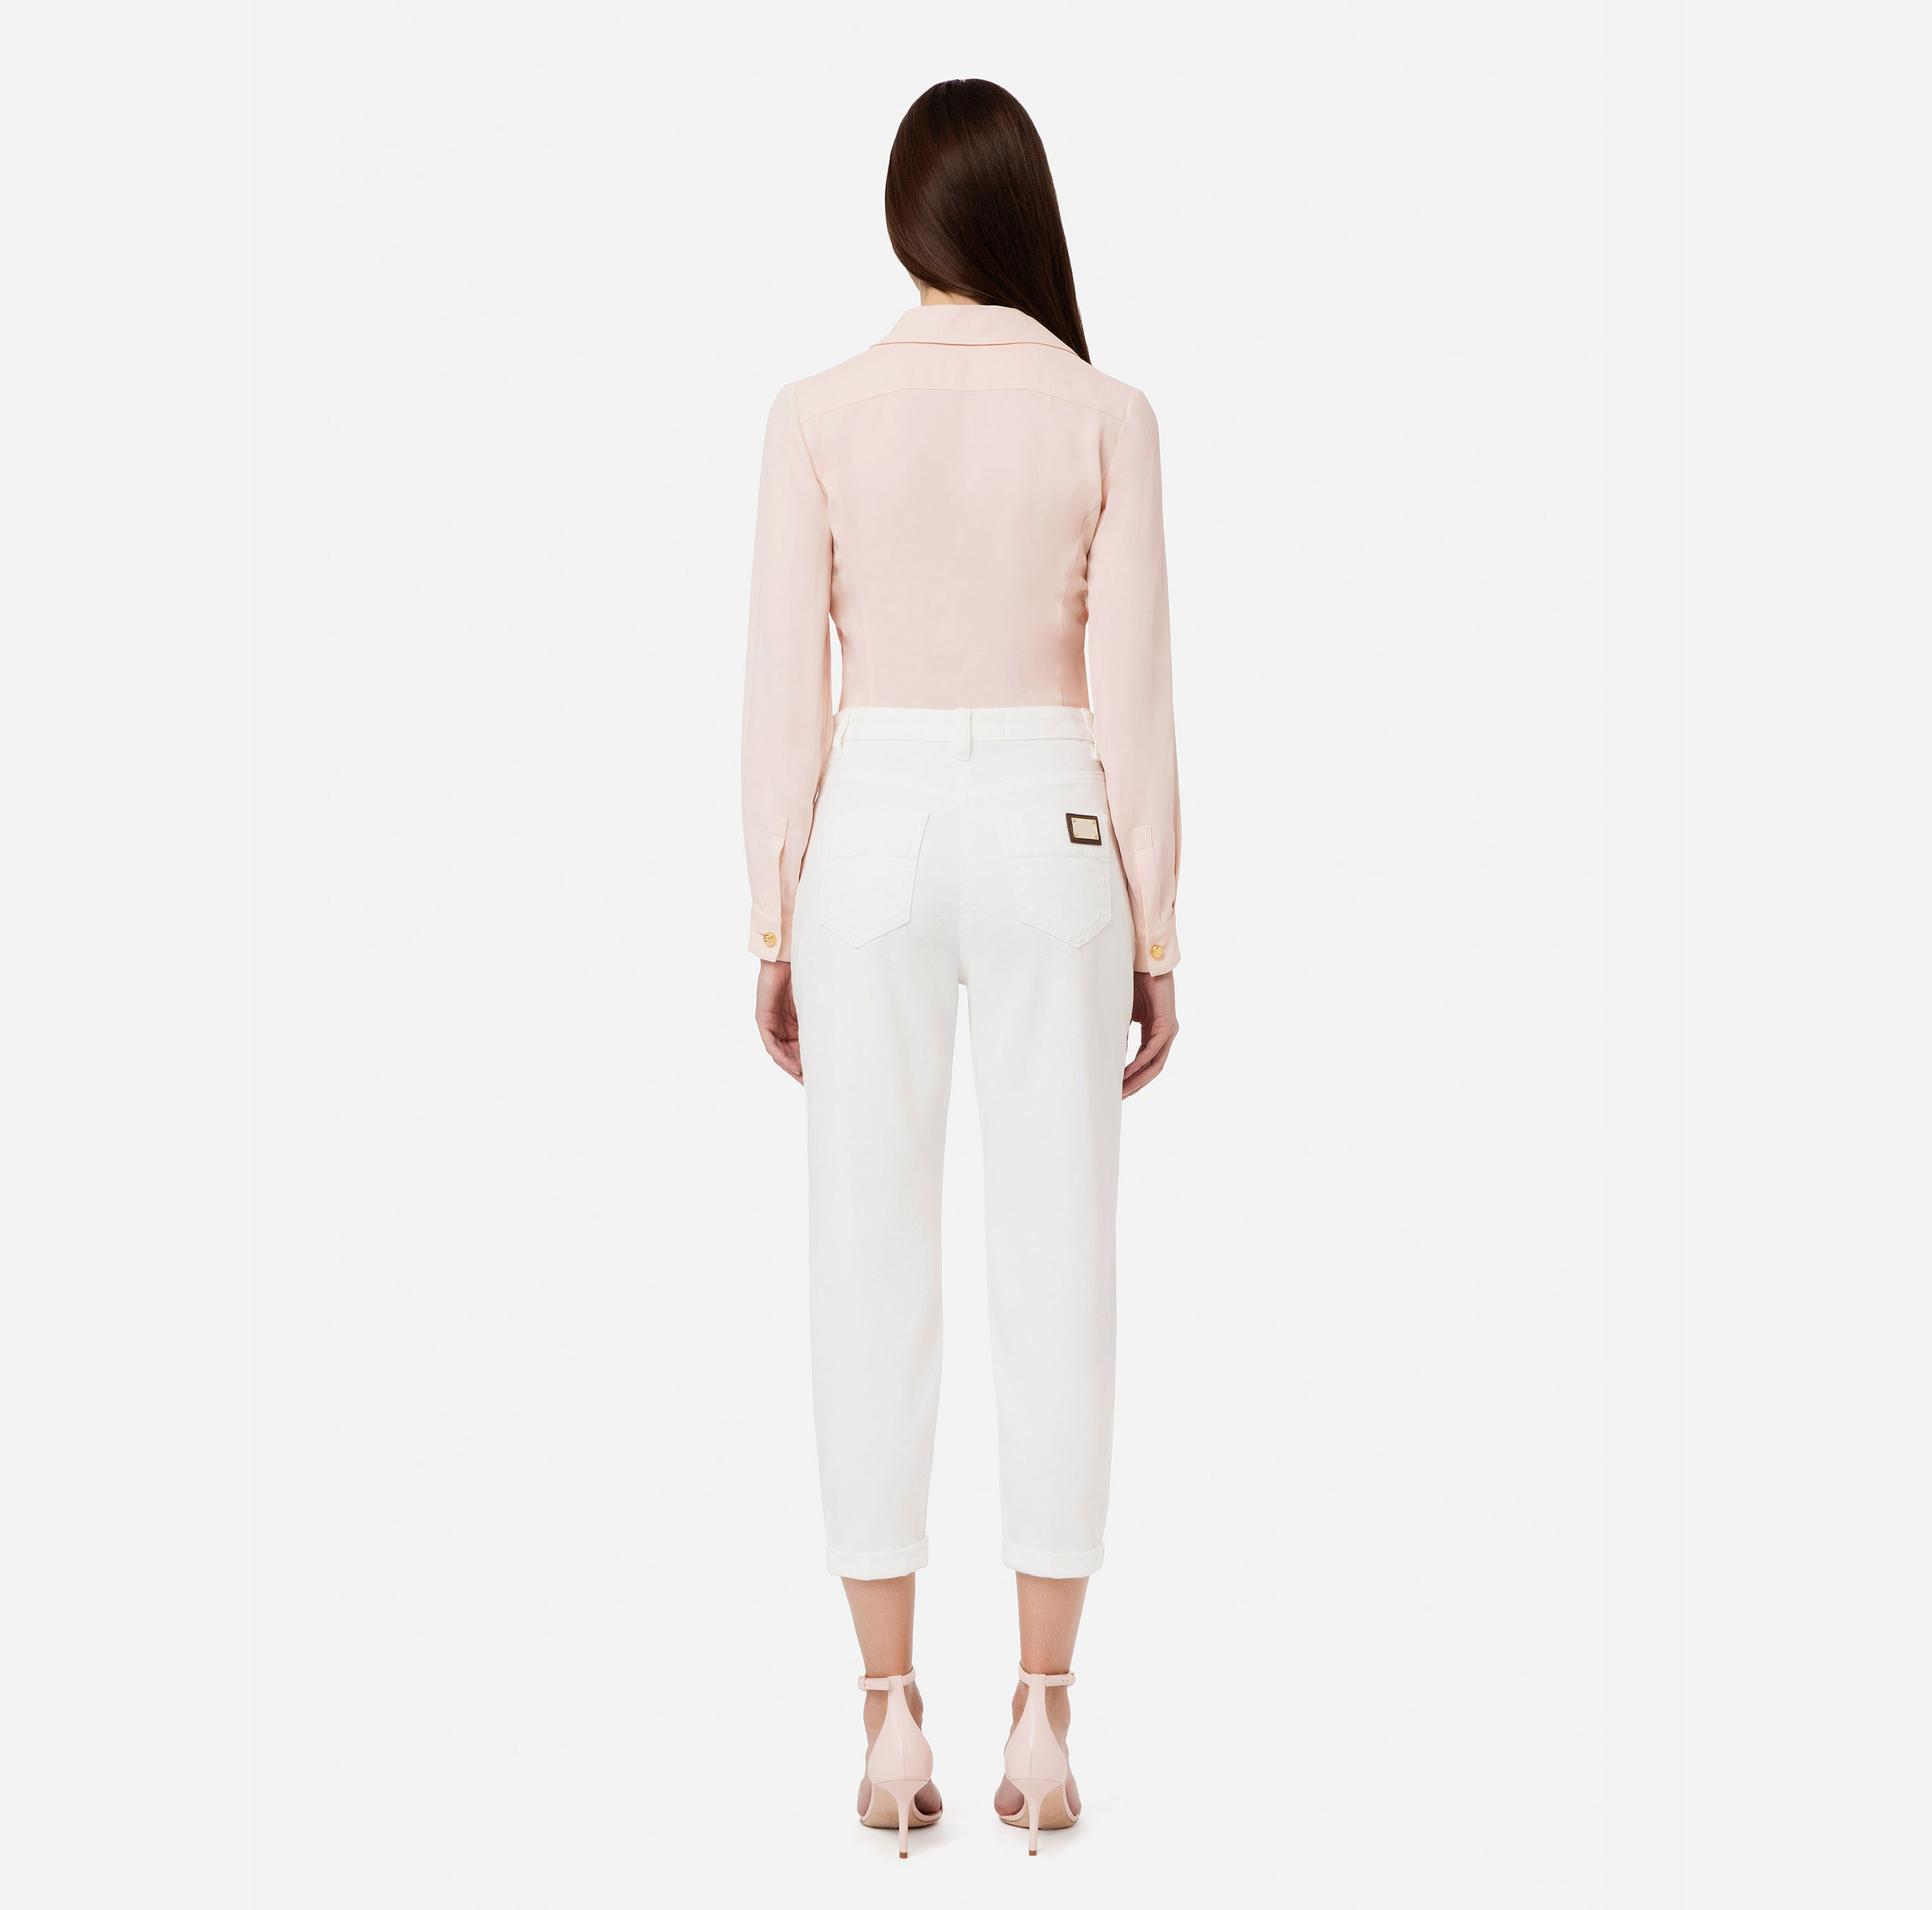 Cropped shirt with collar and V-shaped opening on the front - Elisabetta Franchi